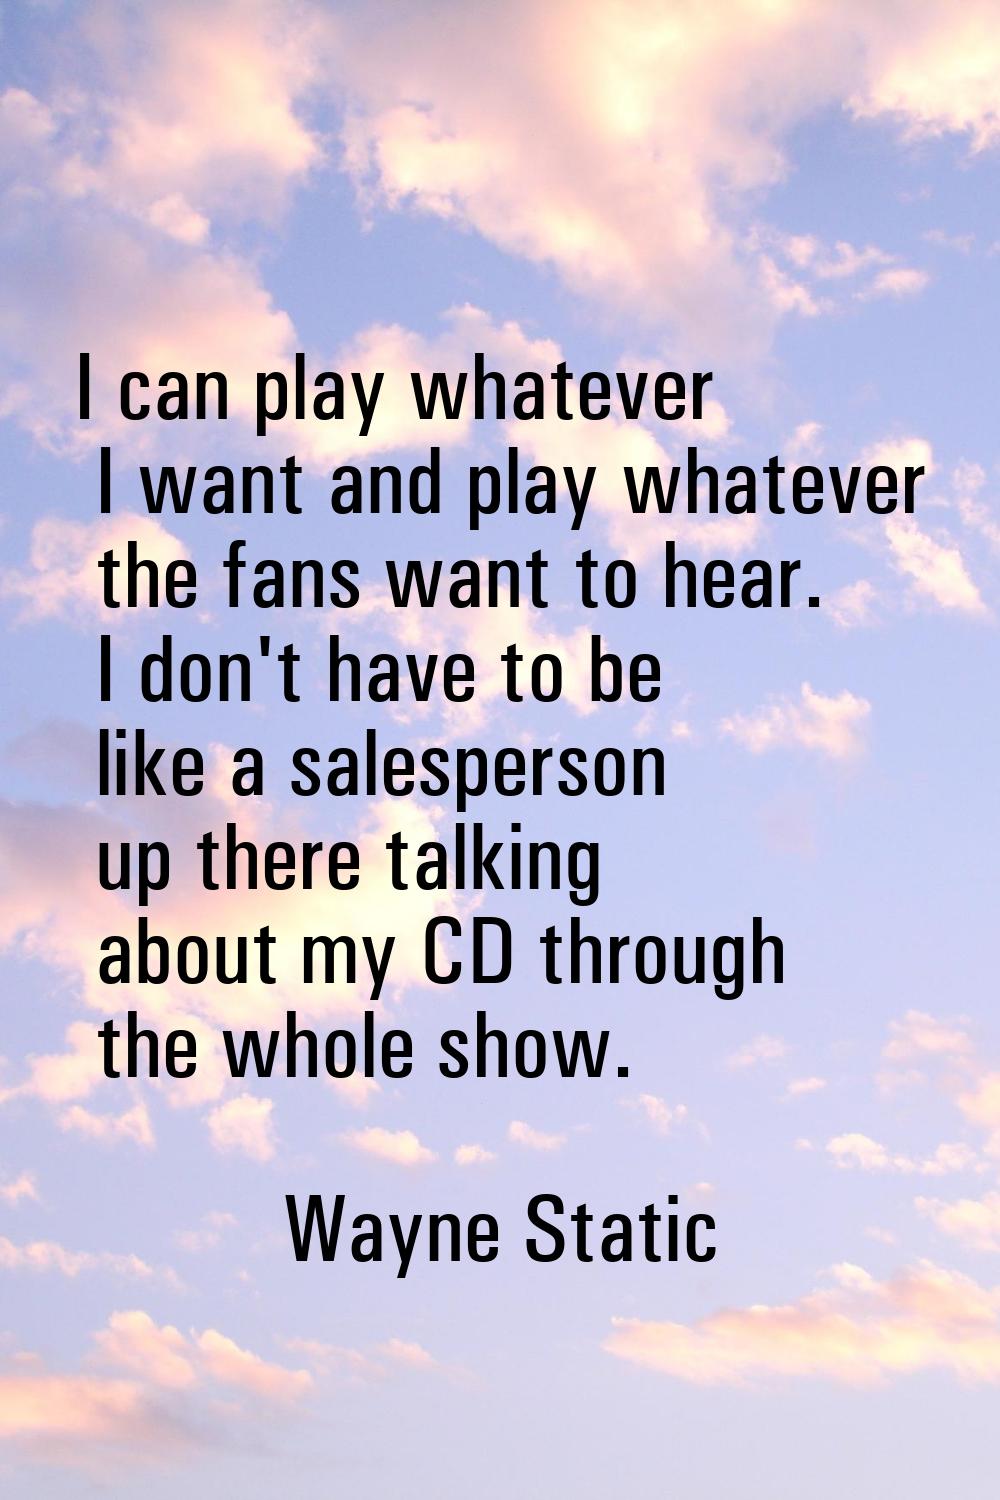 I can play whatever I want and play whatever the fans want to hear. I don't have to be like a sales